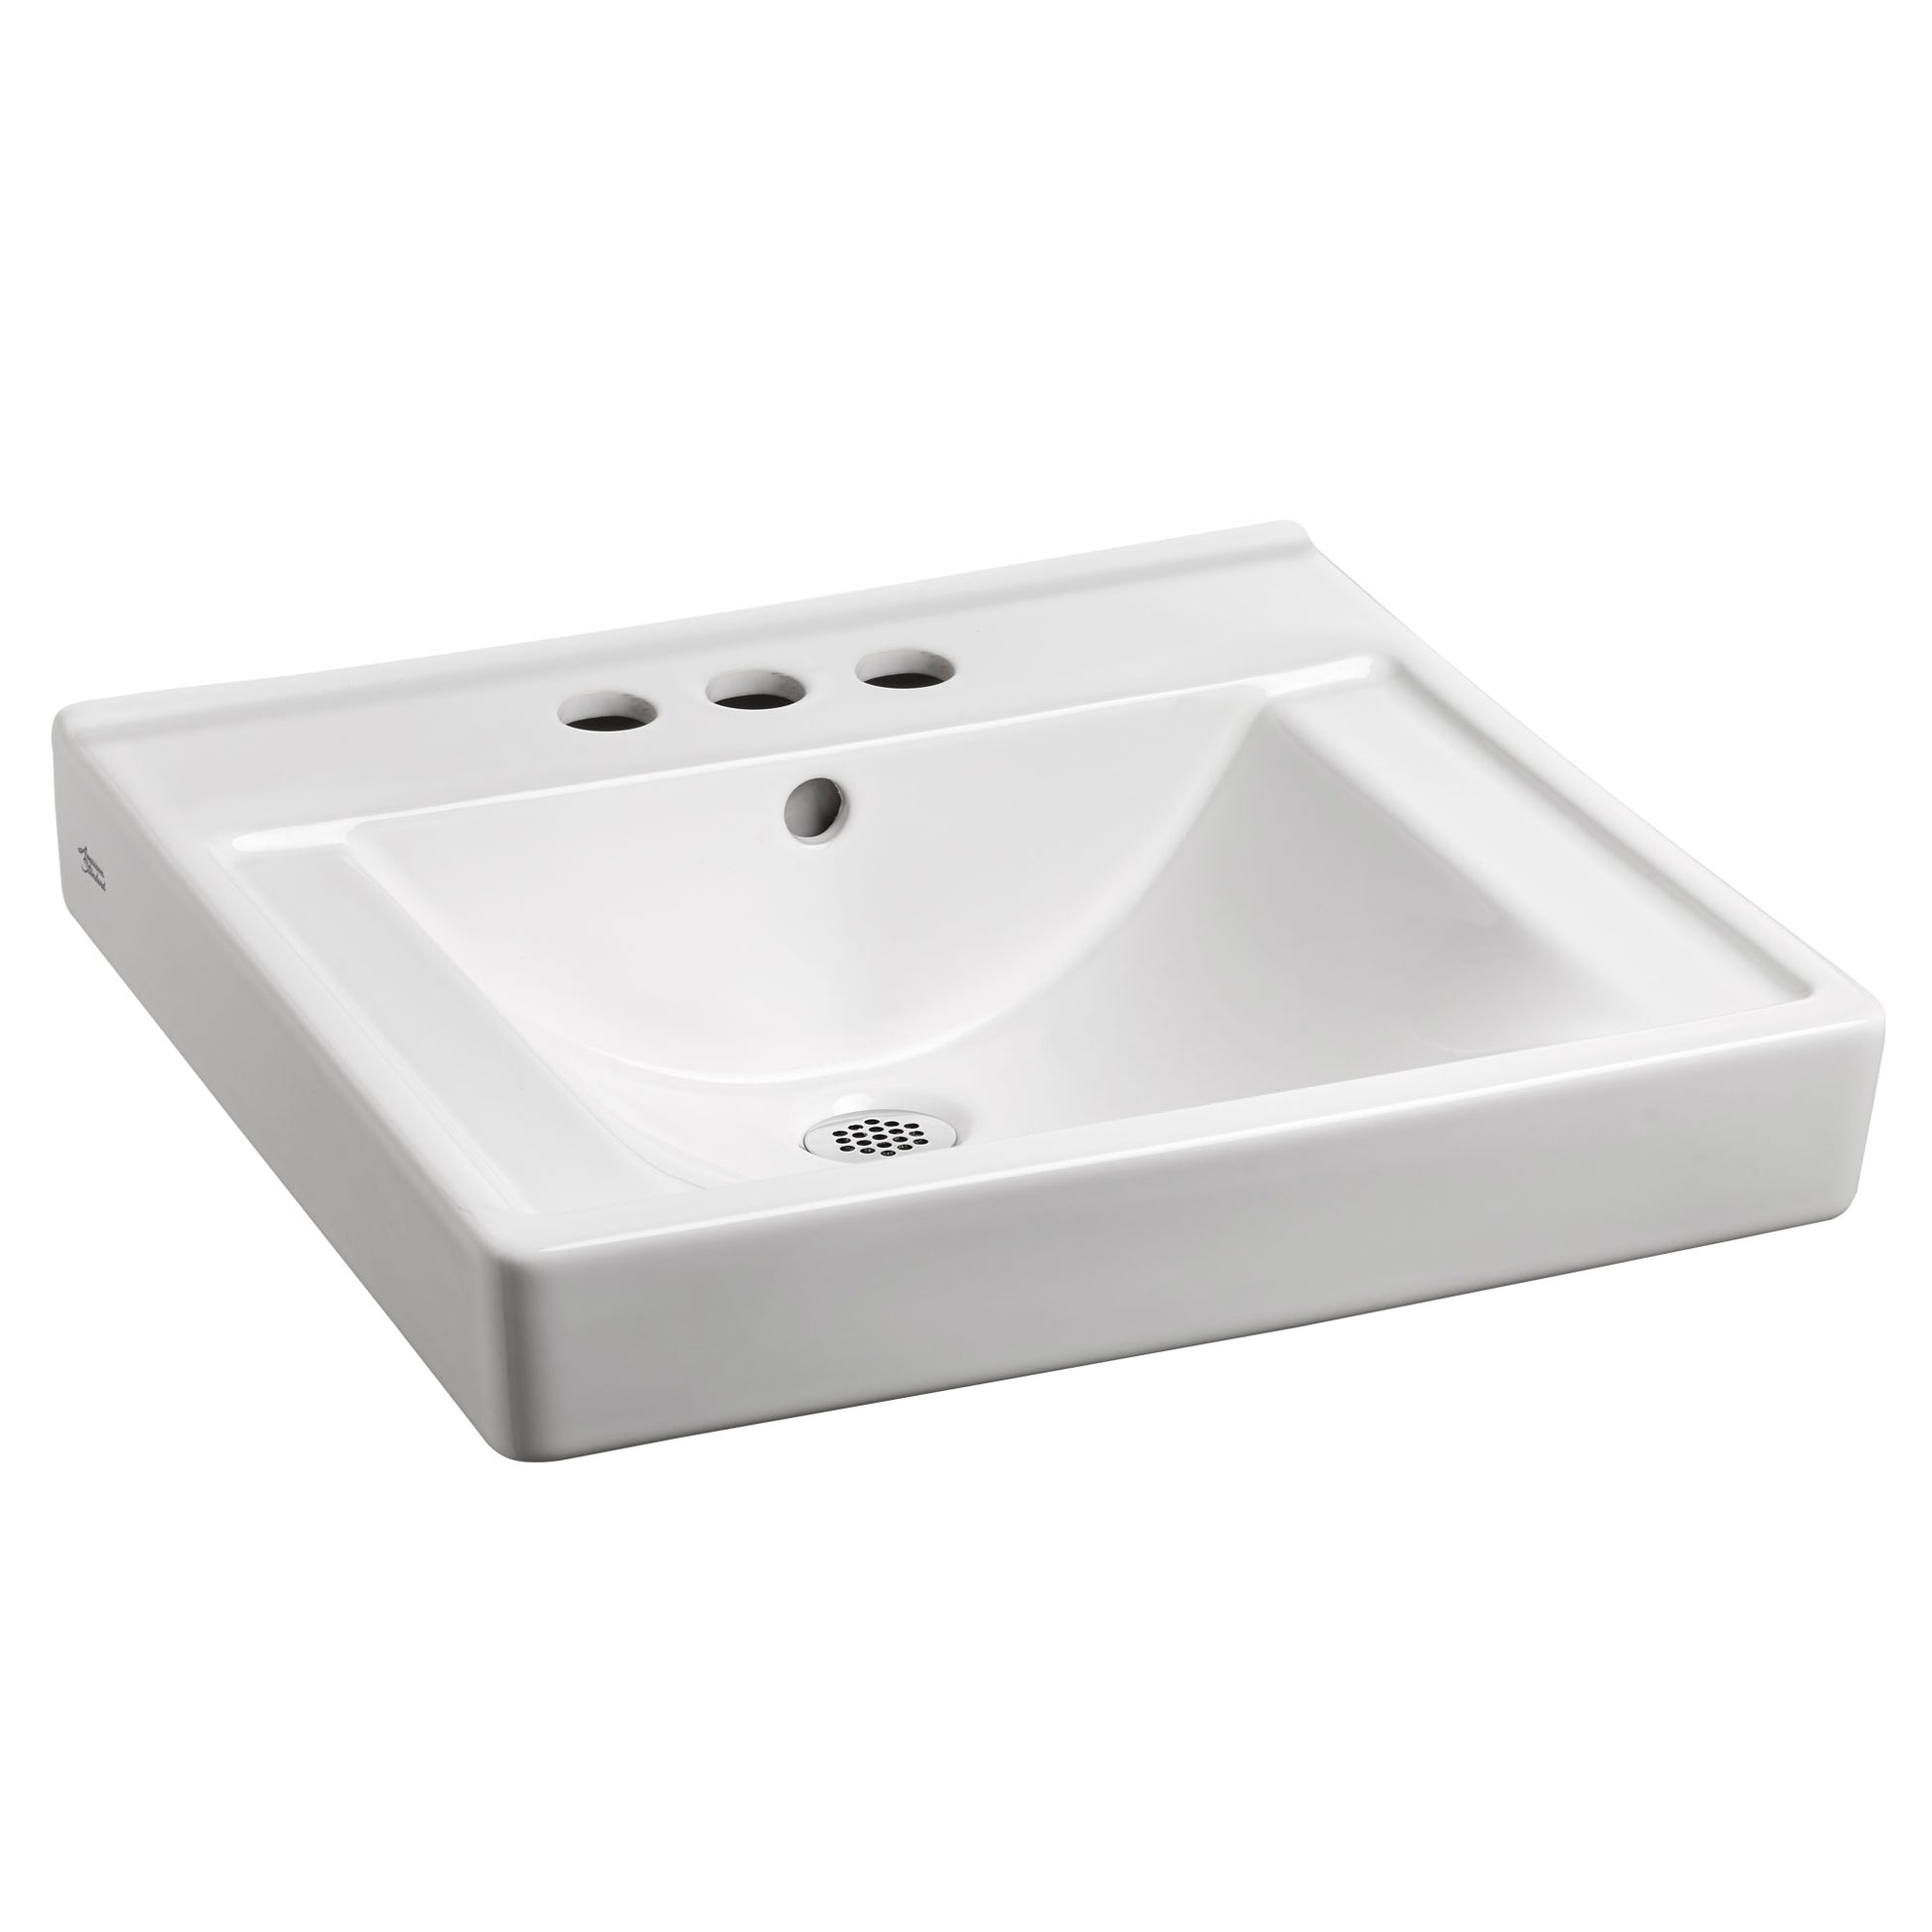 AMERICAN-STANDARD 9024004EC.020, Decorum Wall-Hung EverClean Sink With 4-Inch Centerset in White